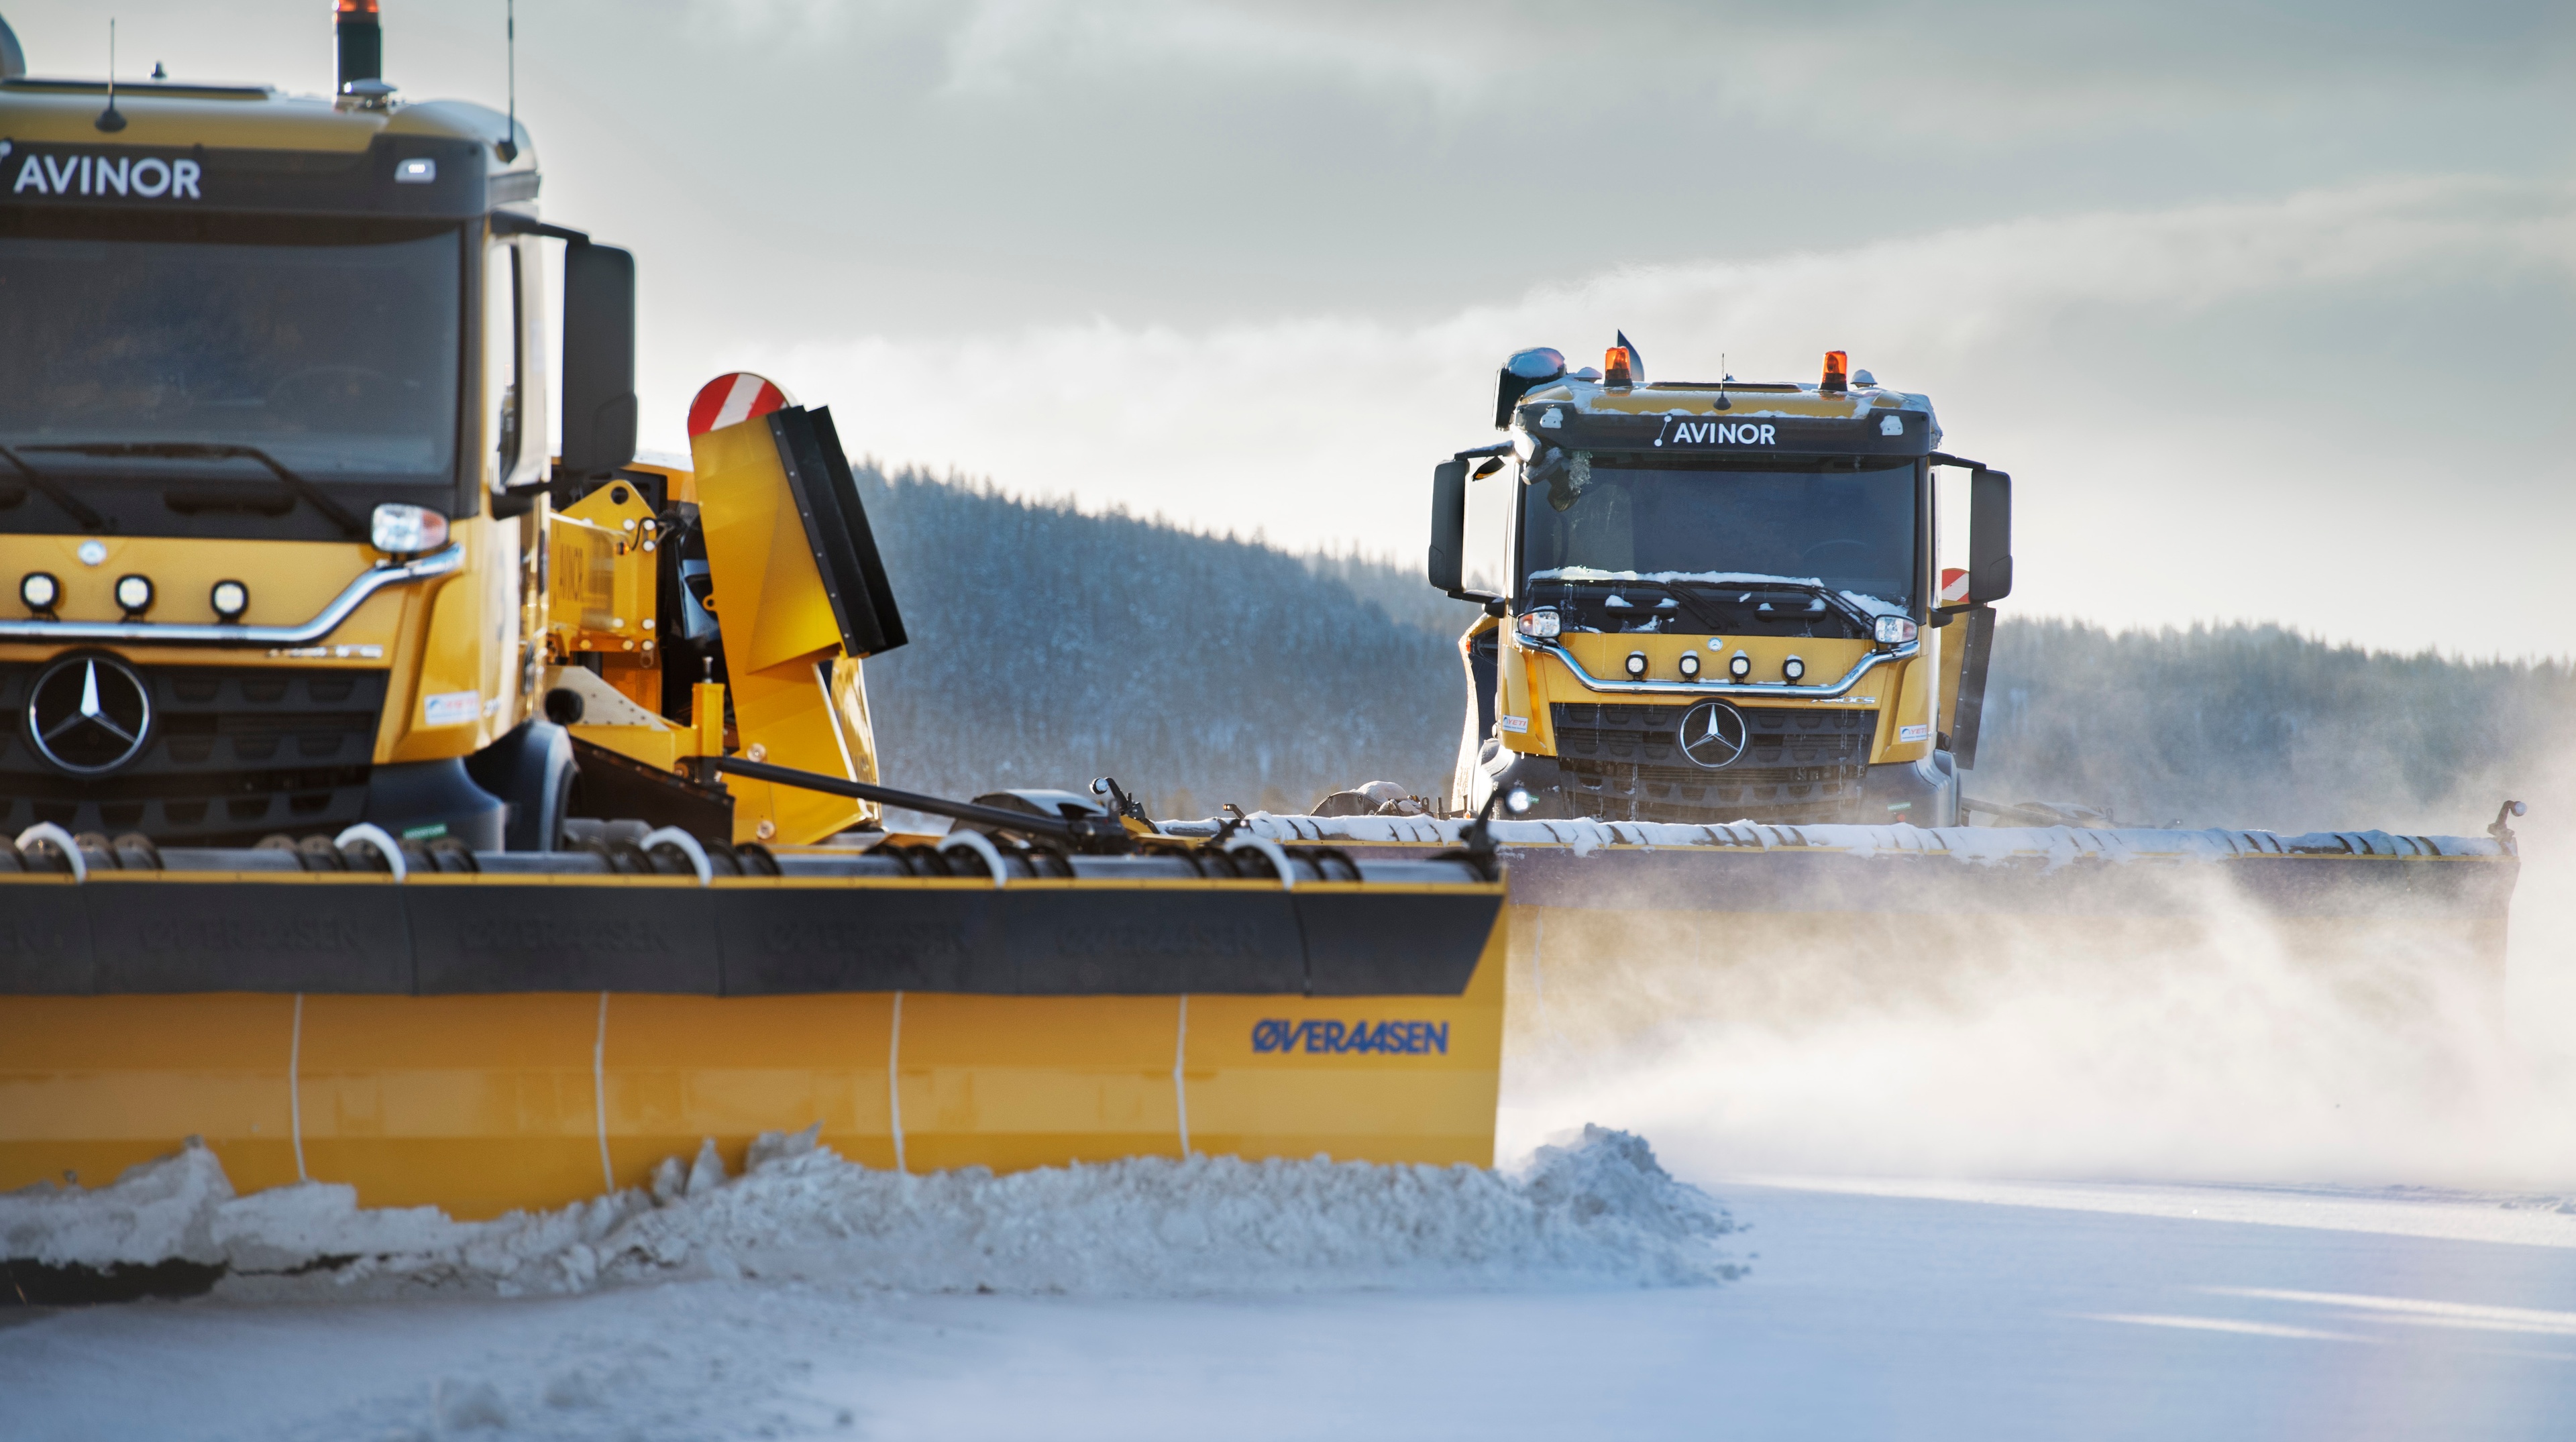 Close up og two yellow snowploughs ploughing snow at an airport runway